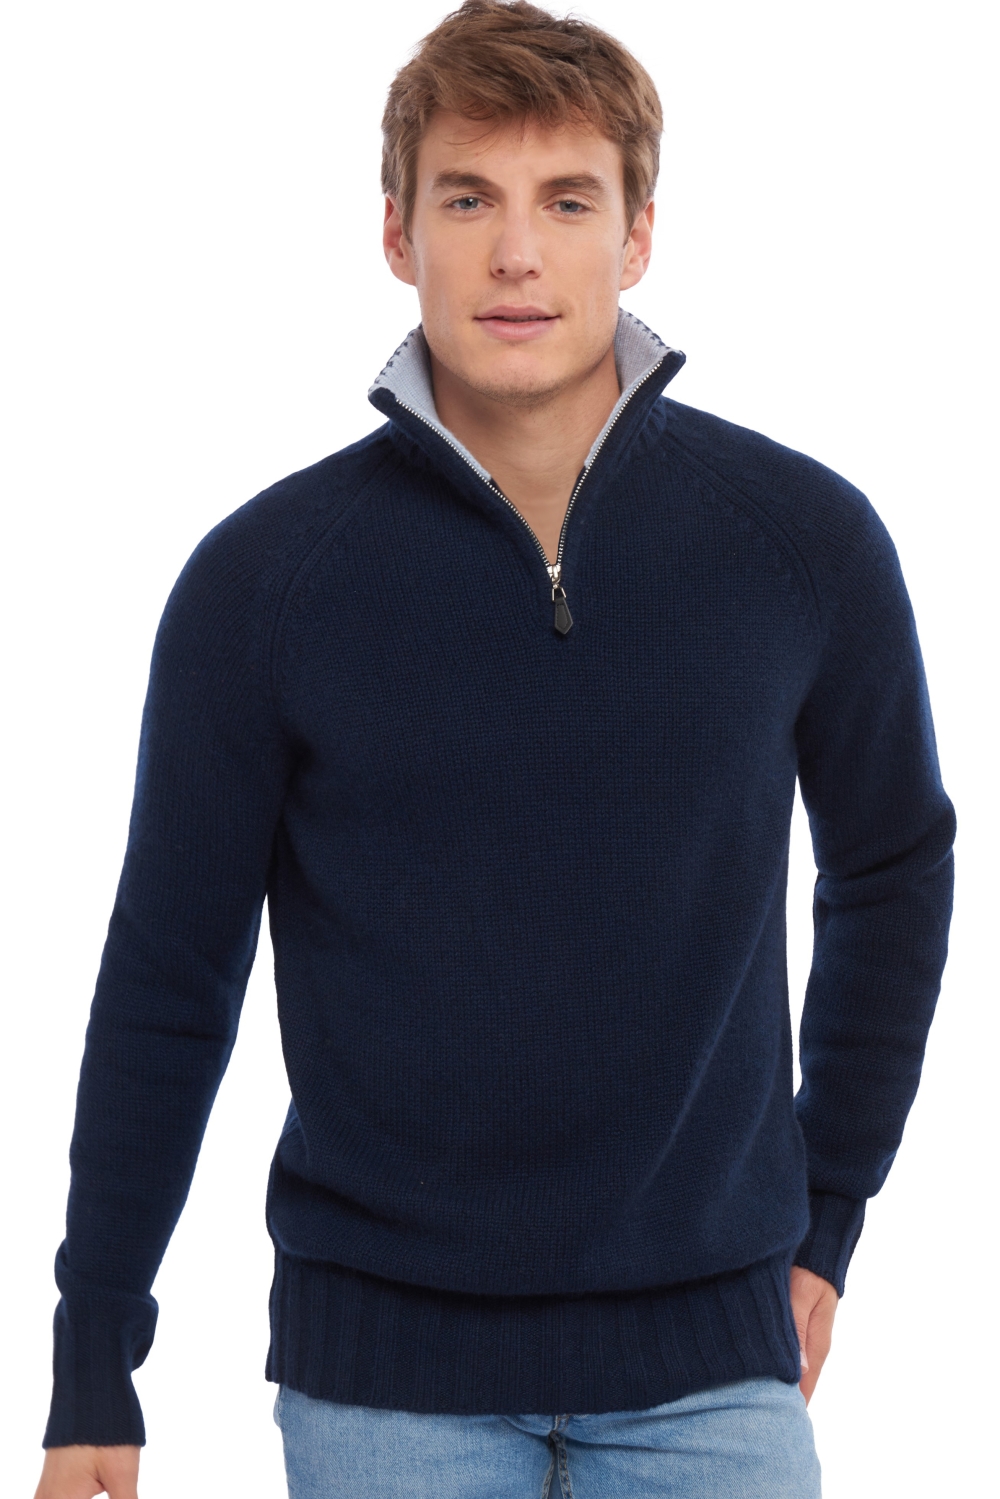 Cachemire pull homme olivier marine fonce ciel s